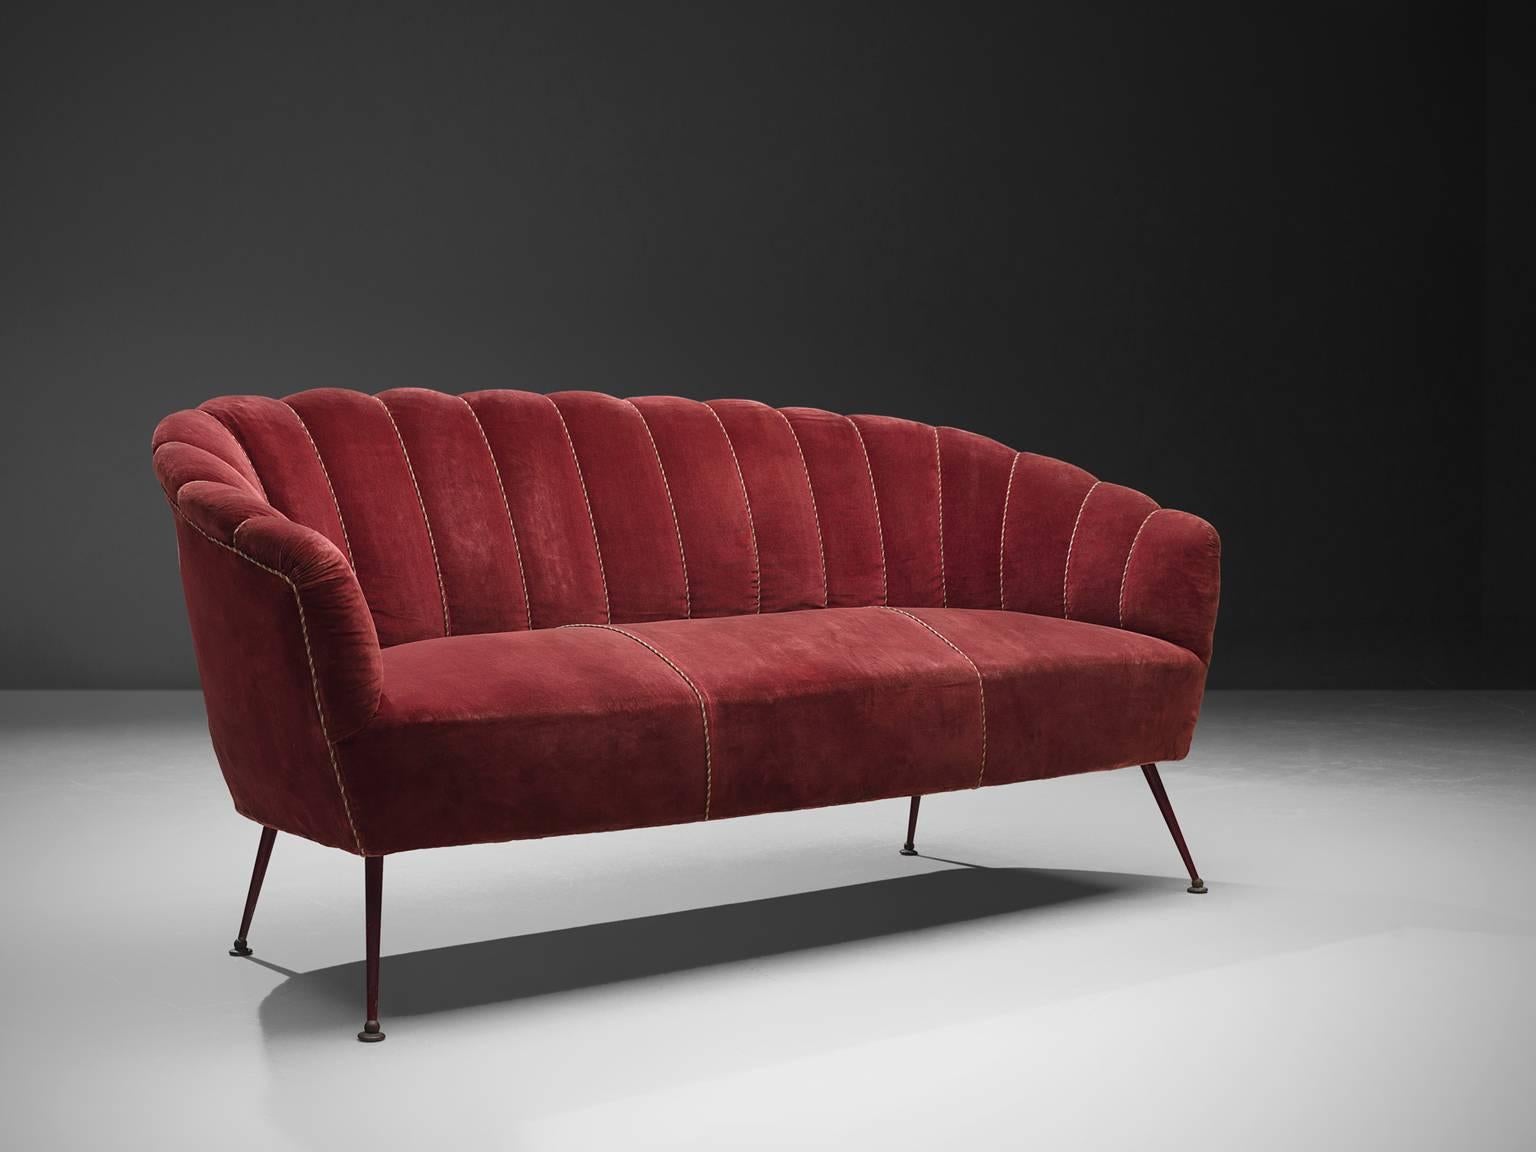 Settee attributed to ISA, red velvet and wood, Italy, 1950s. 

This ornate, cute but grand sofa is strong and playful at the same time. The webbed back gives perfect support for the sitter. The delicate wooden legs support the voluptuous seat,